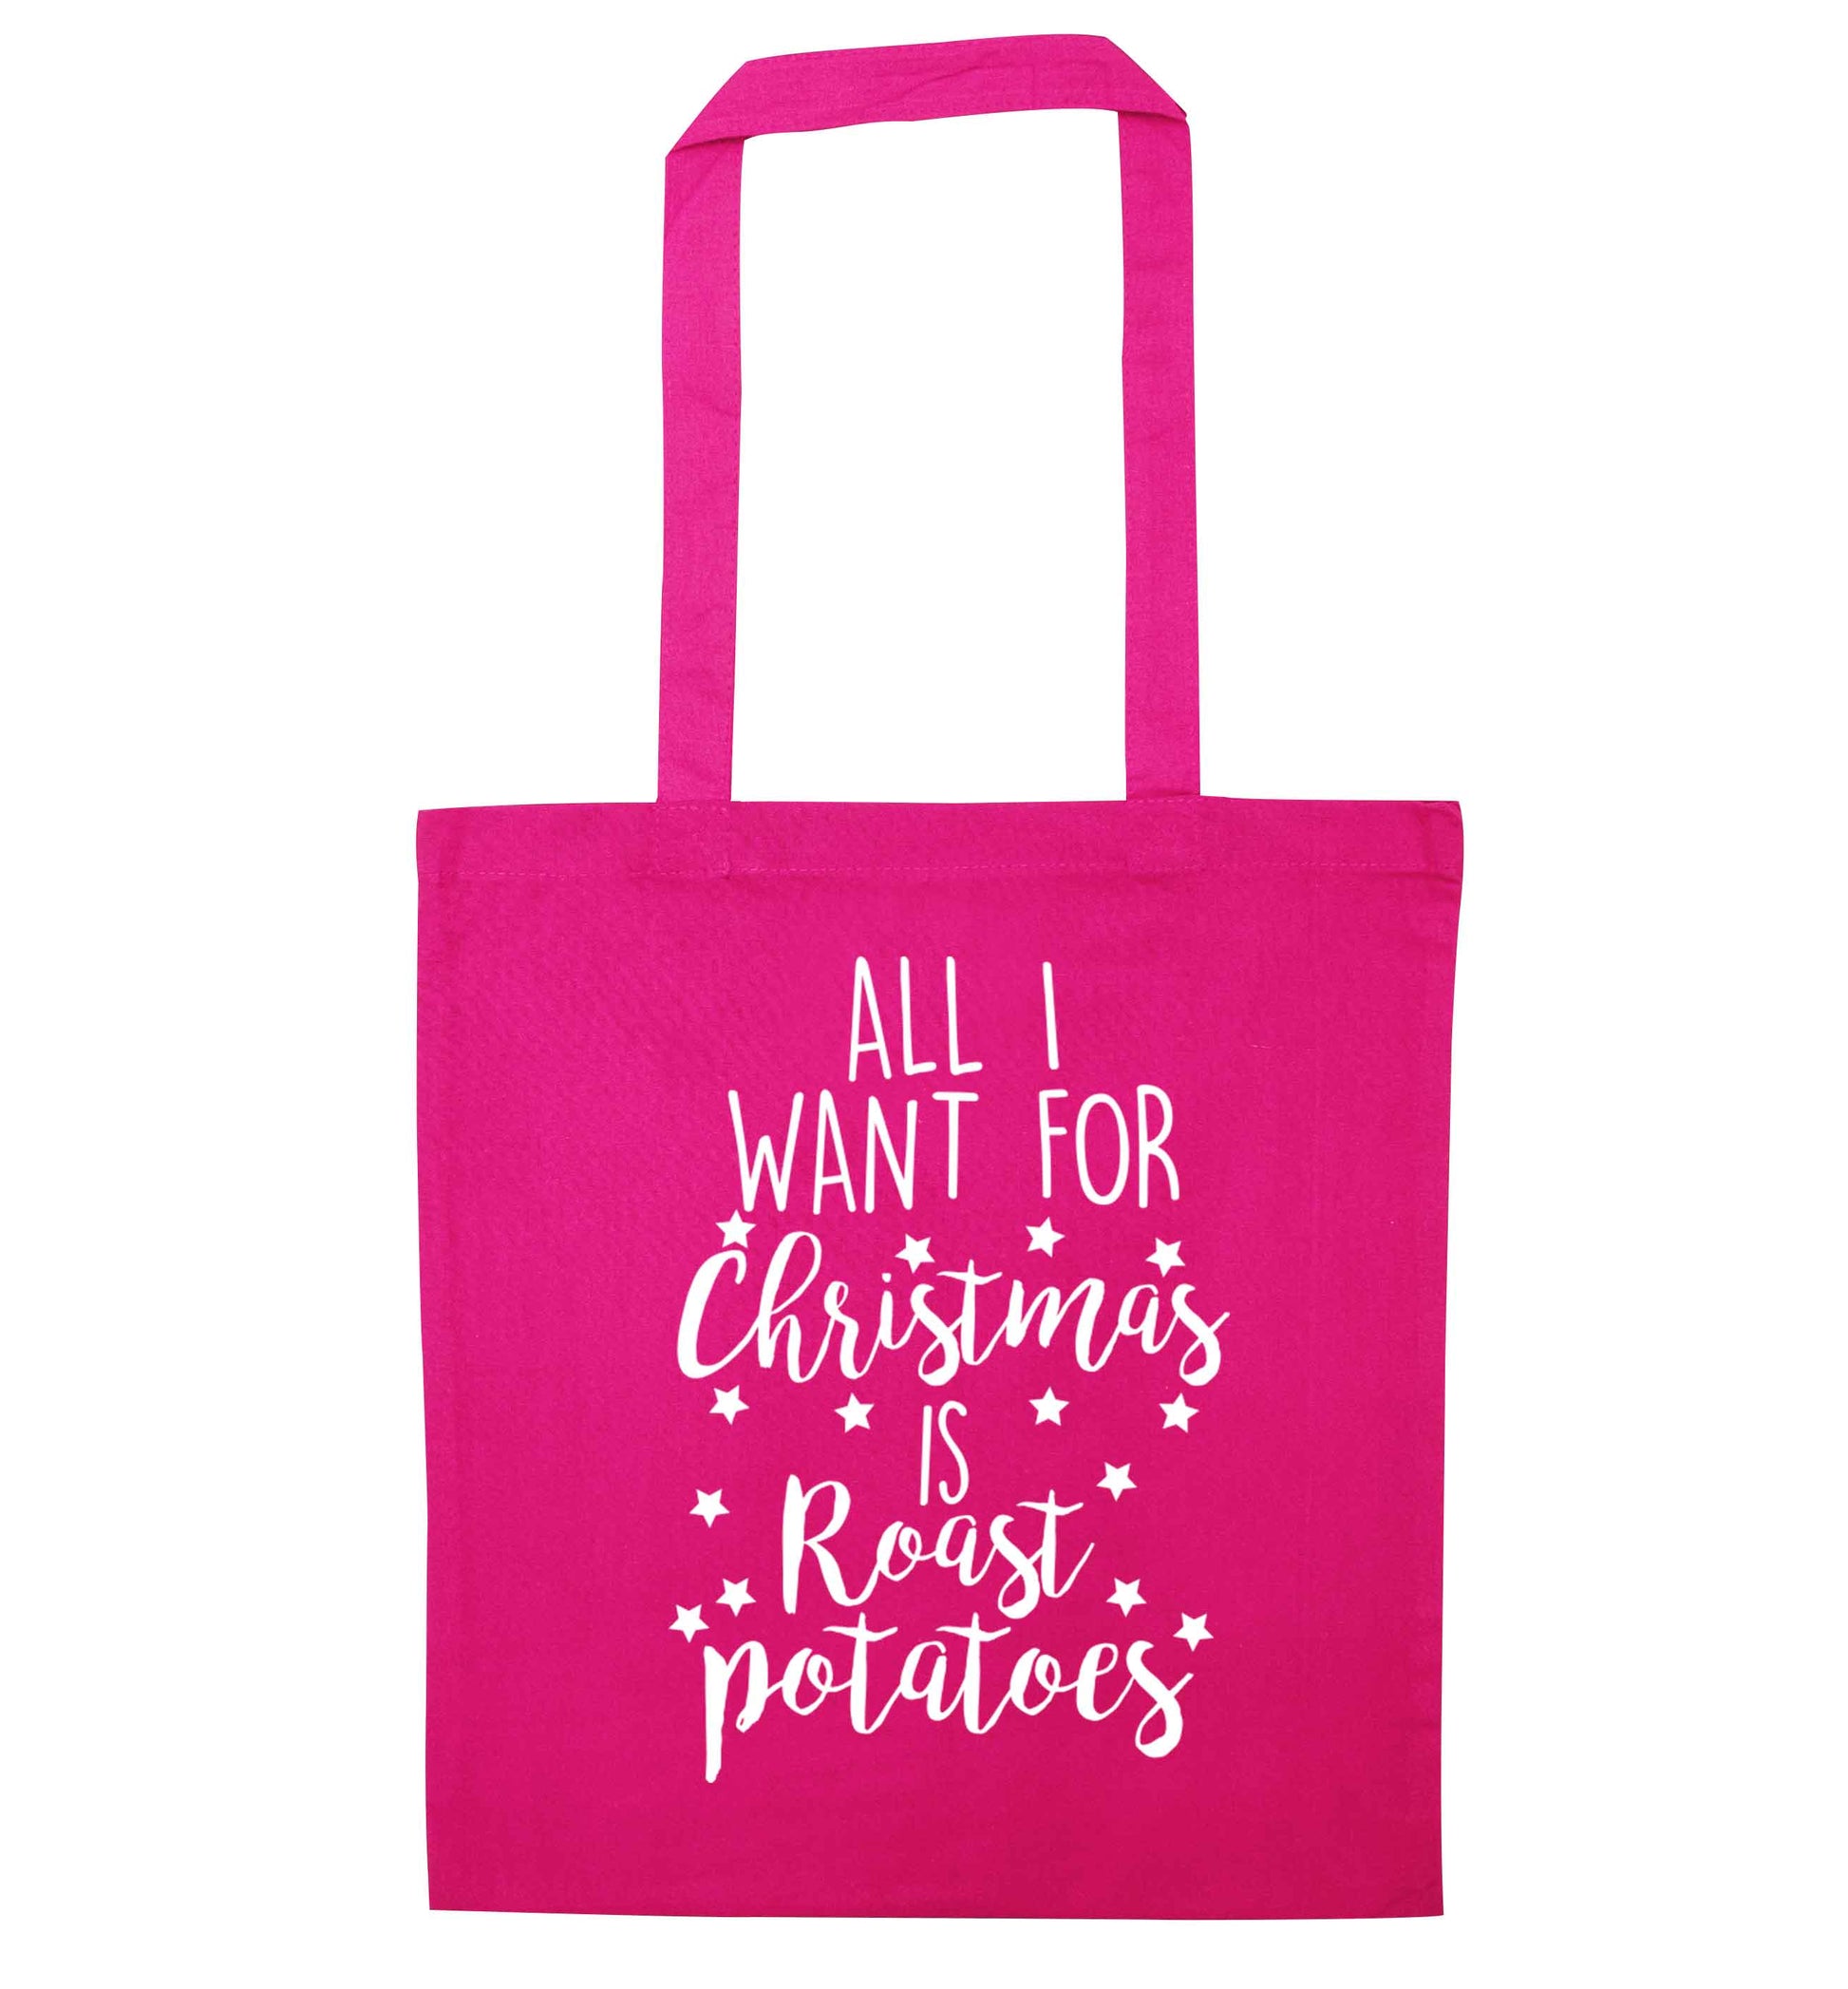 All I want for Christmas is roast potatoes pink tote bag